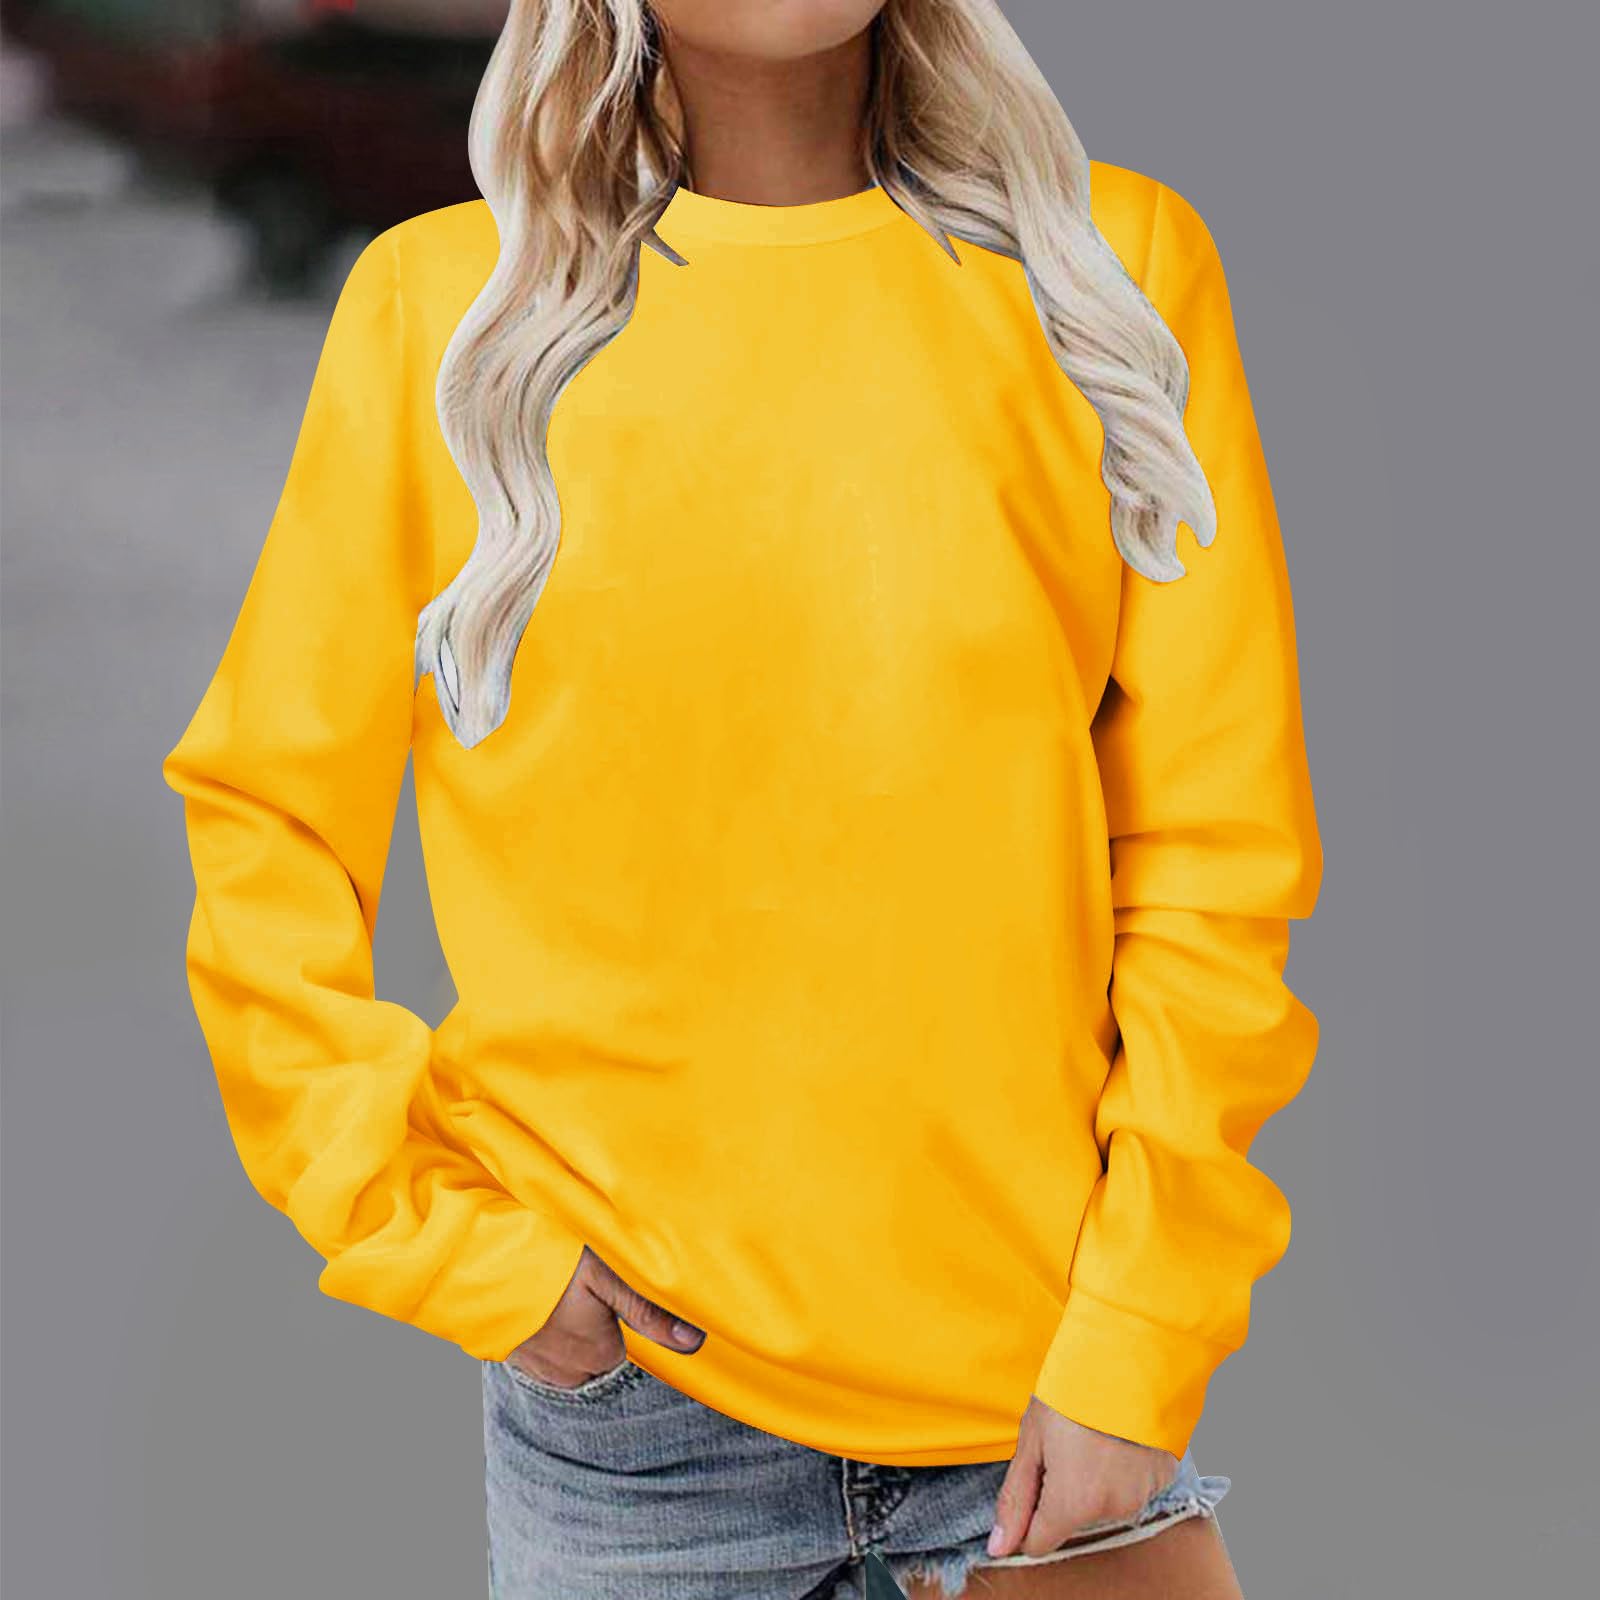 lightning deals of today prime Fall Sweatshirts For Women Fashion Solid Long Sleeve Crewneck Tunic Shirts Casual Loose Comfy Pullover Tops Hoodie Sweaters For Women Yellow L